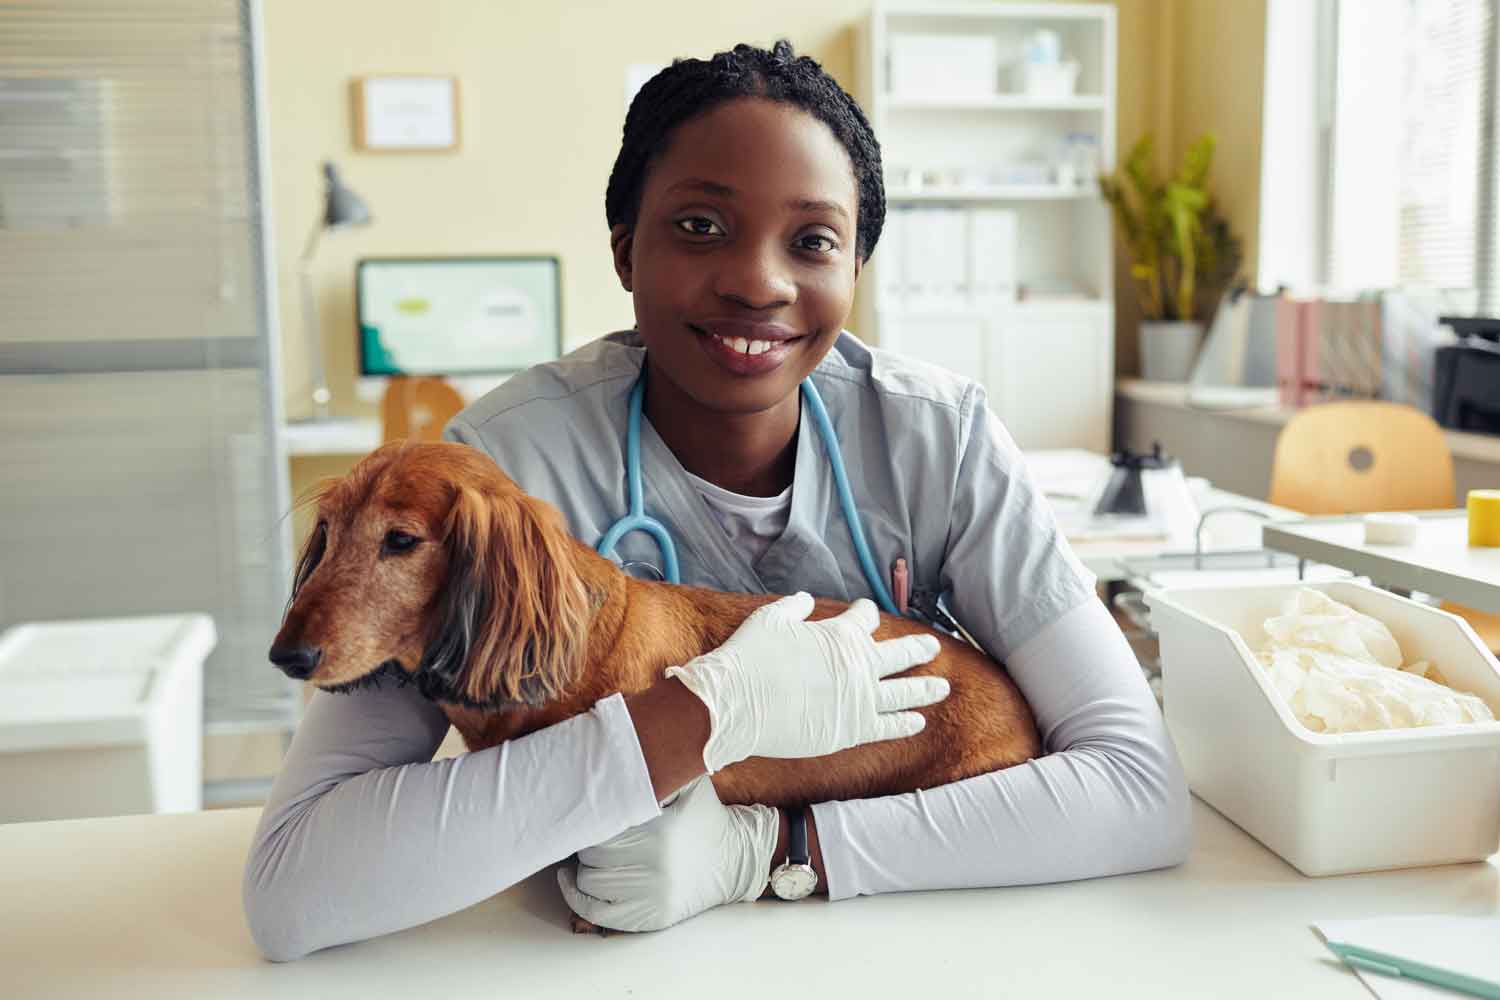 A veterinarian smiles and wraps her arms around a small dog on a table in an exam room.